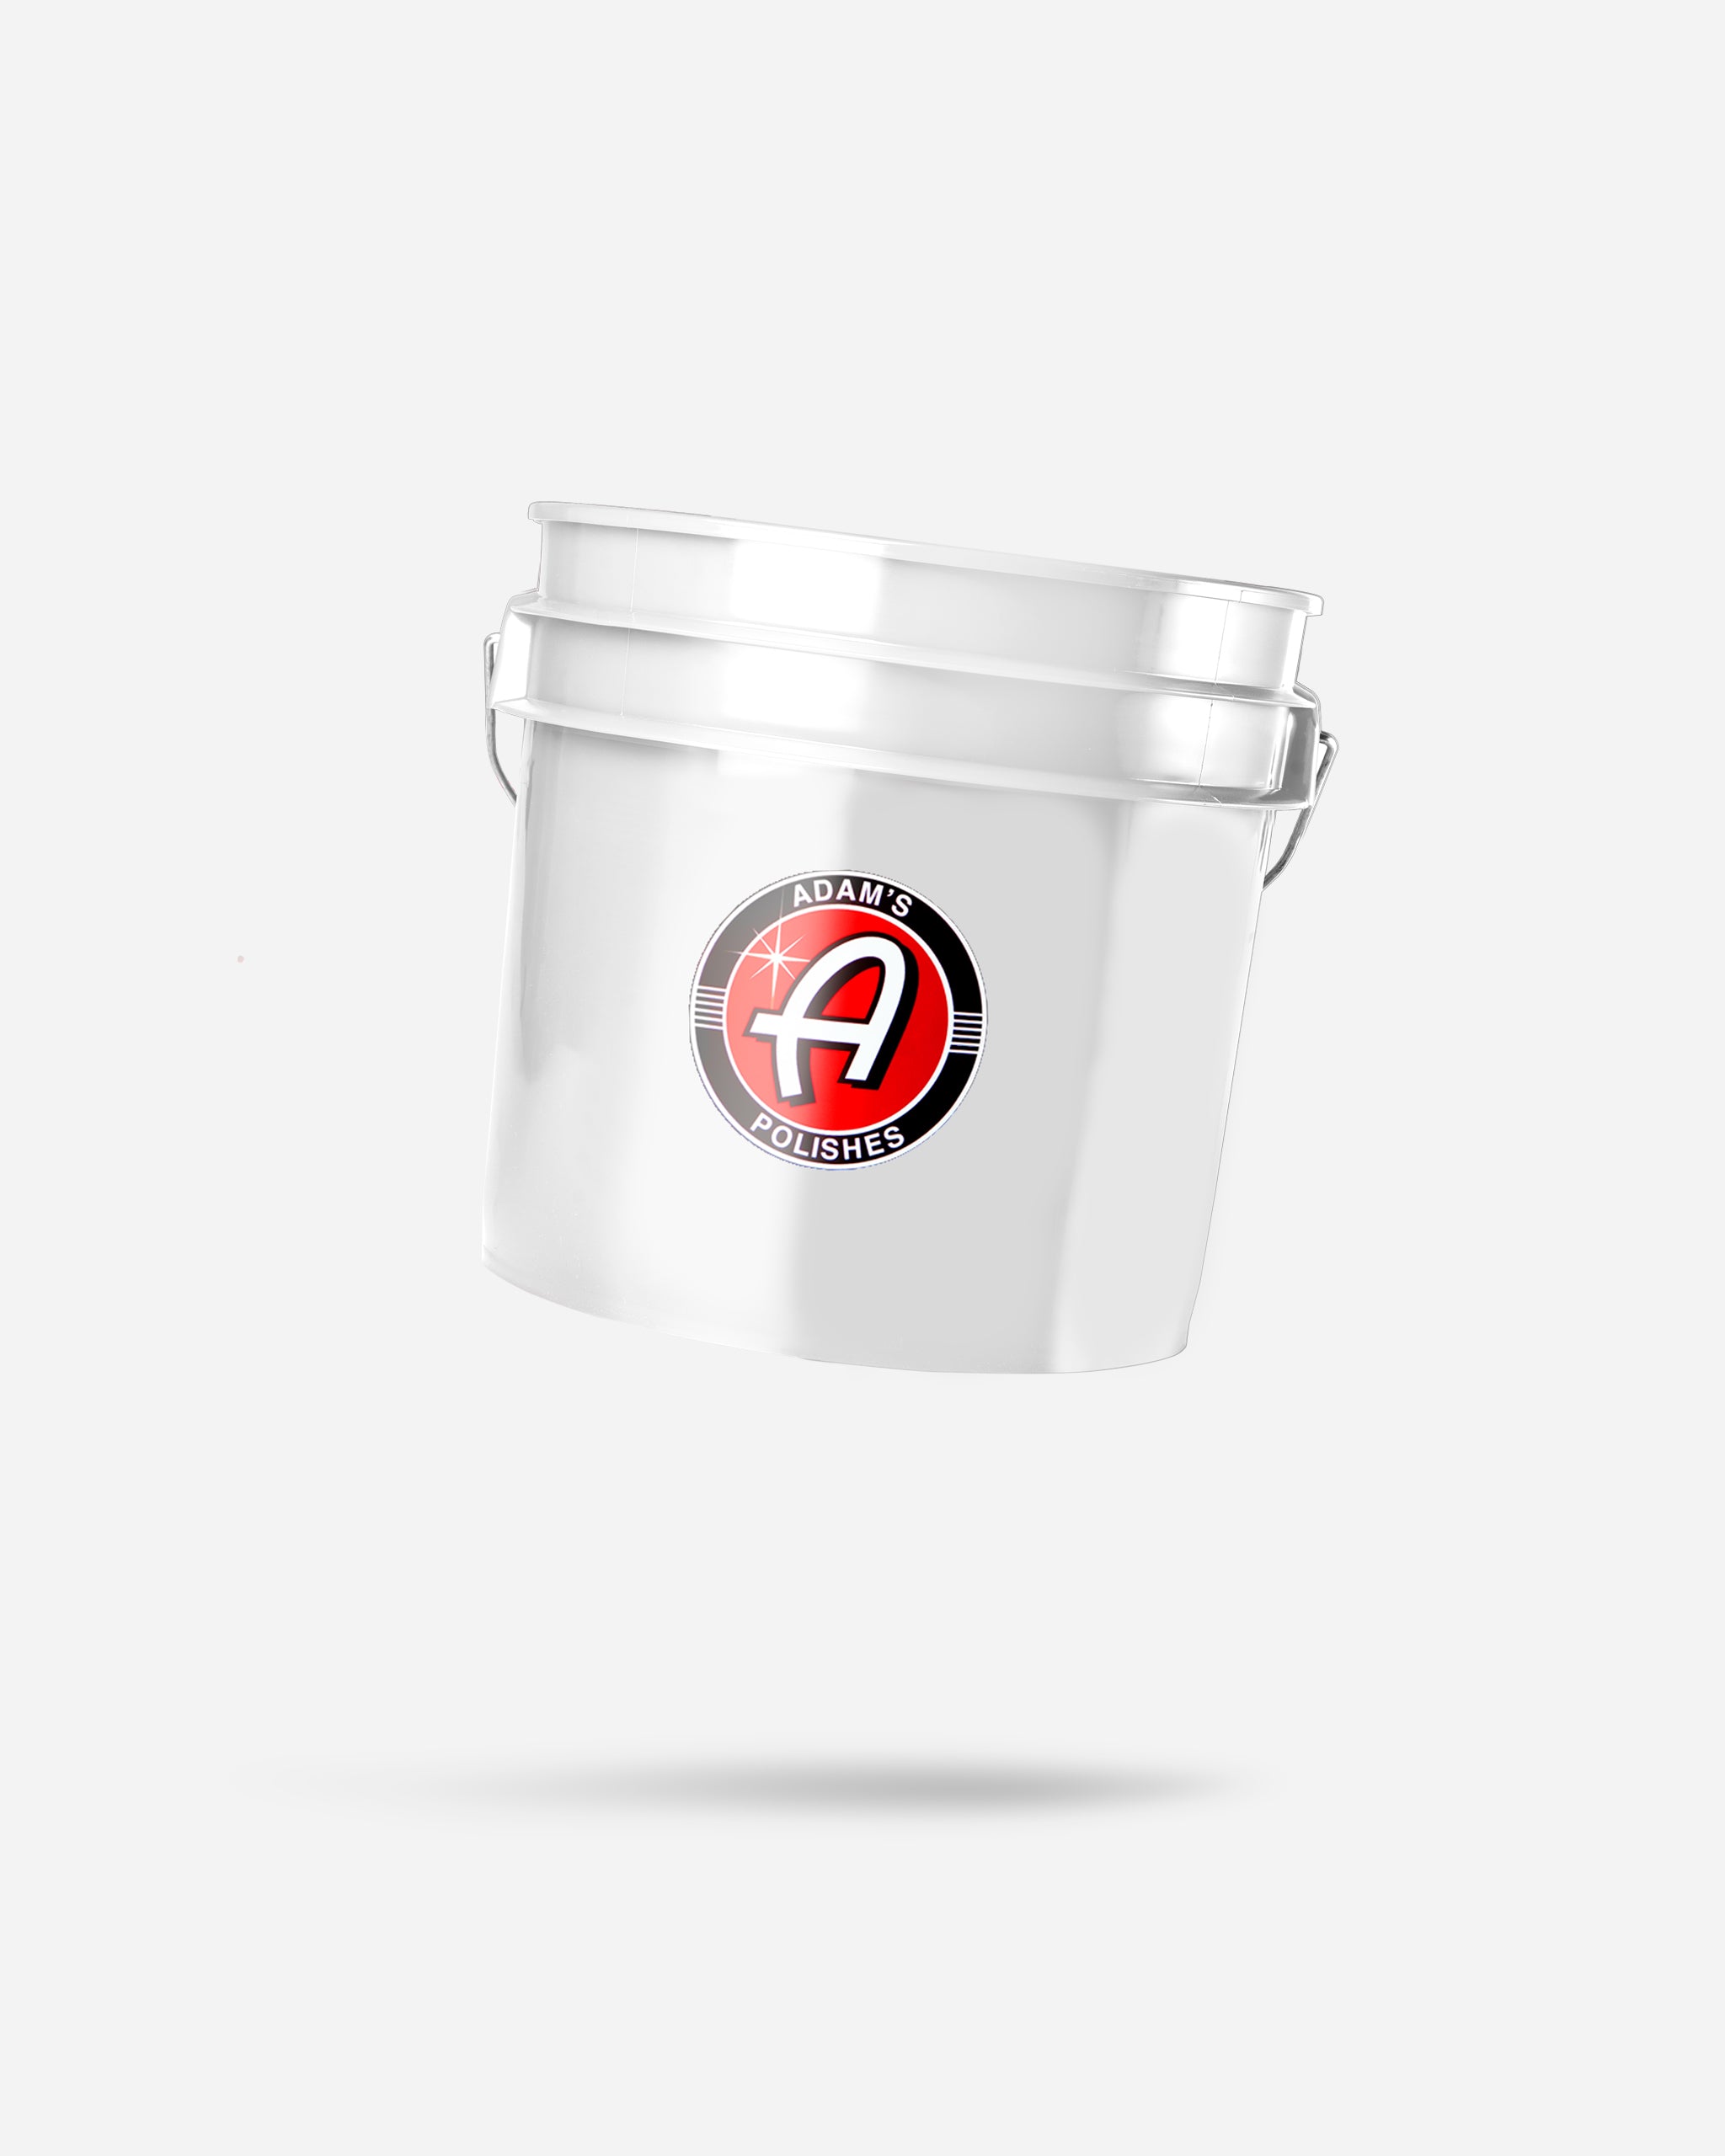 Bucket + Grit Guard Combo, Product